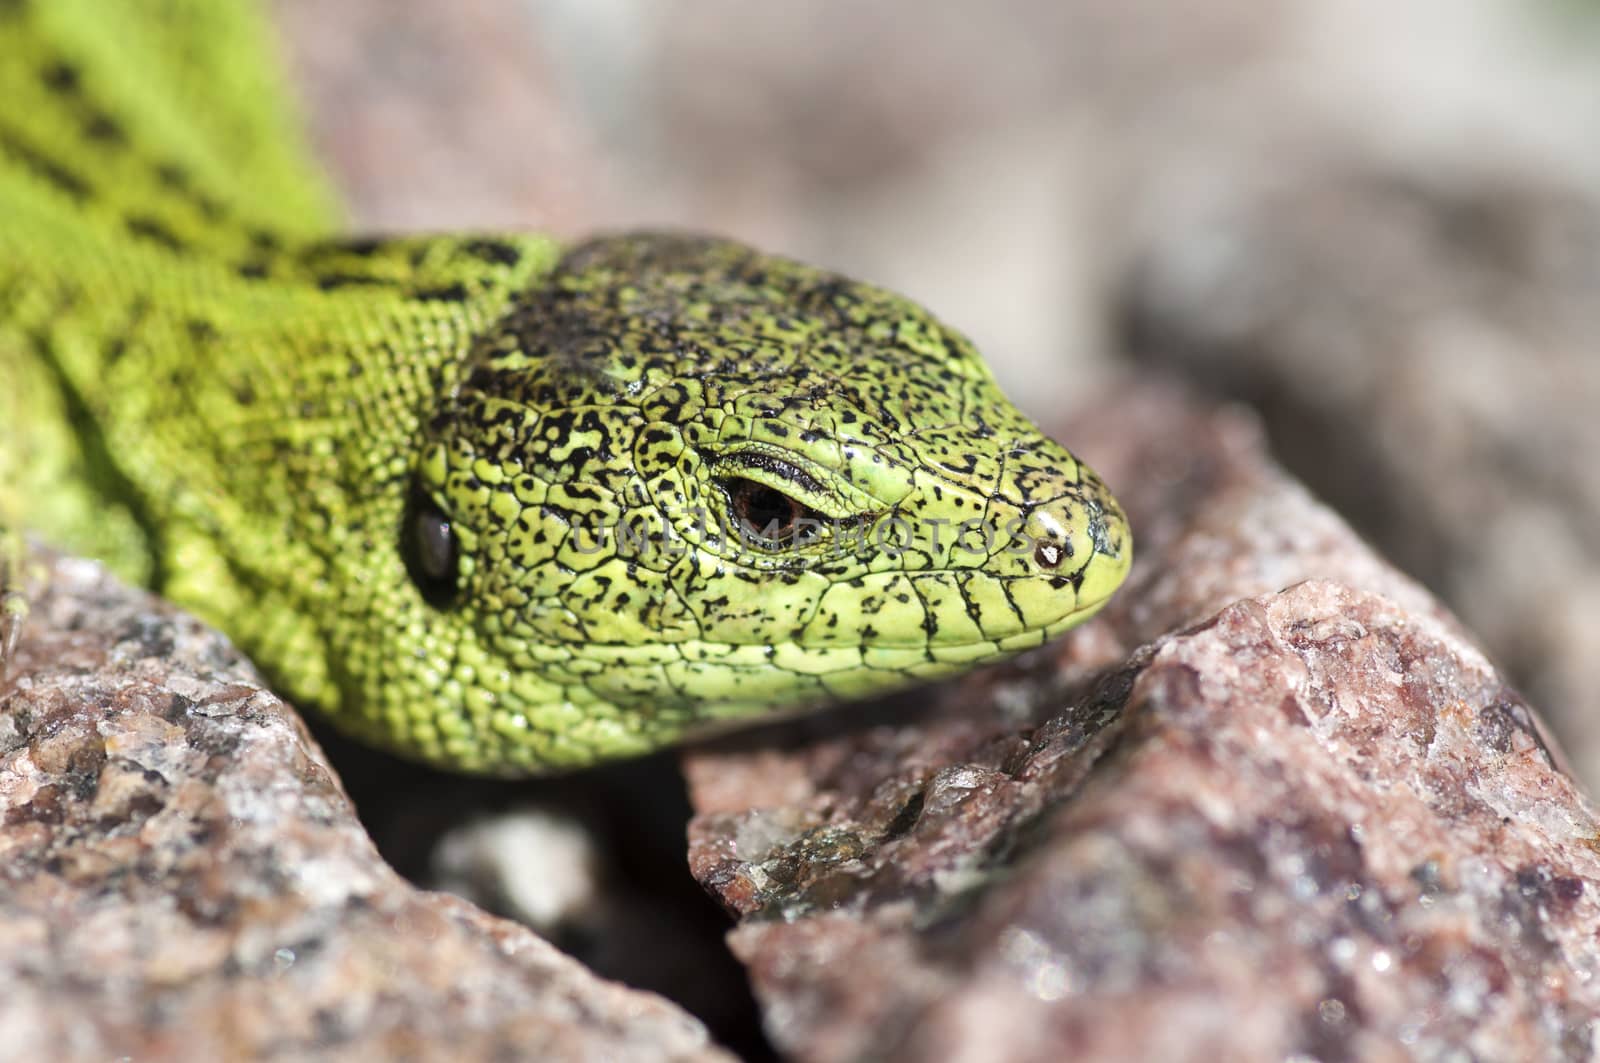 Sand lizard (Lacerta agilis) male close up by dred